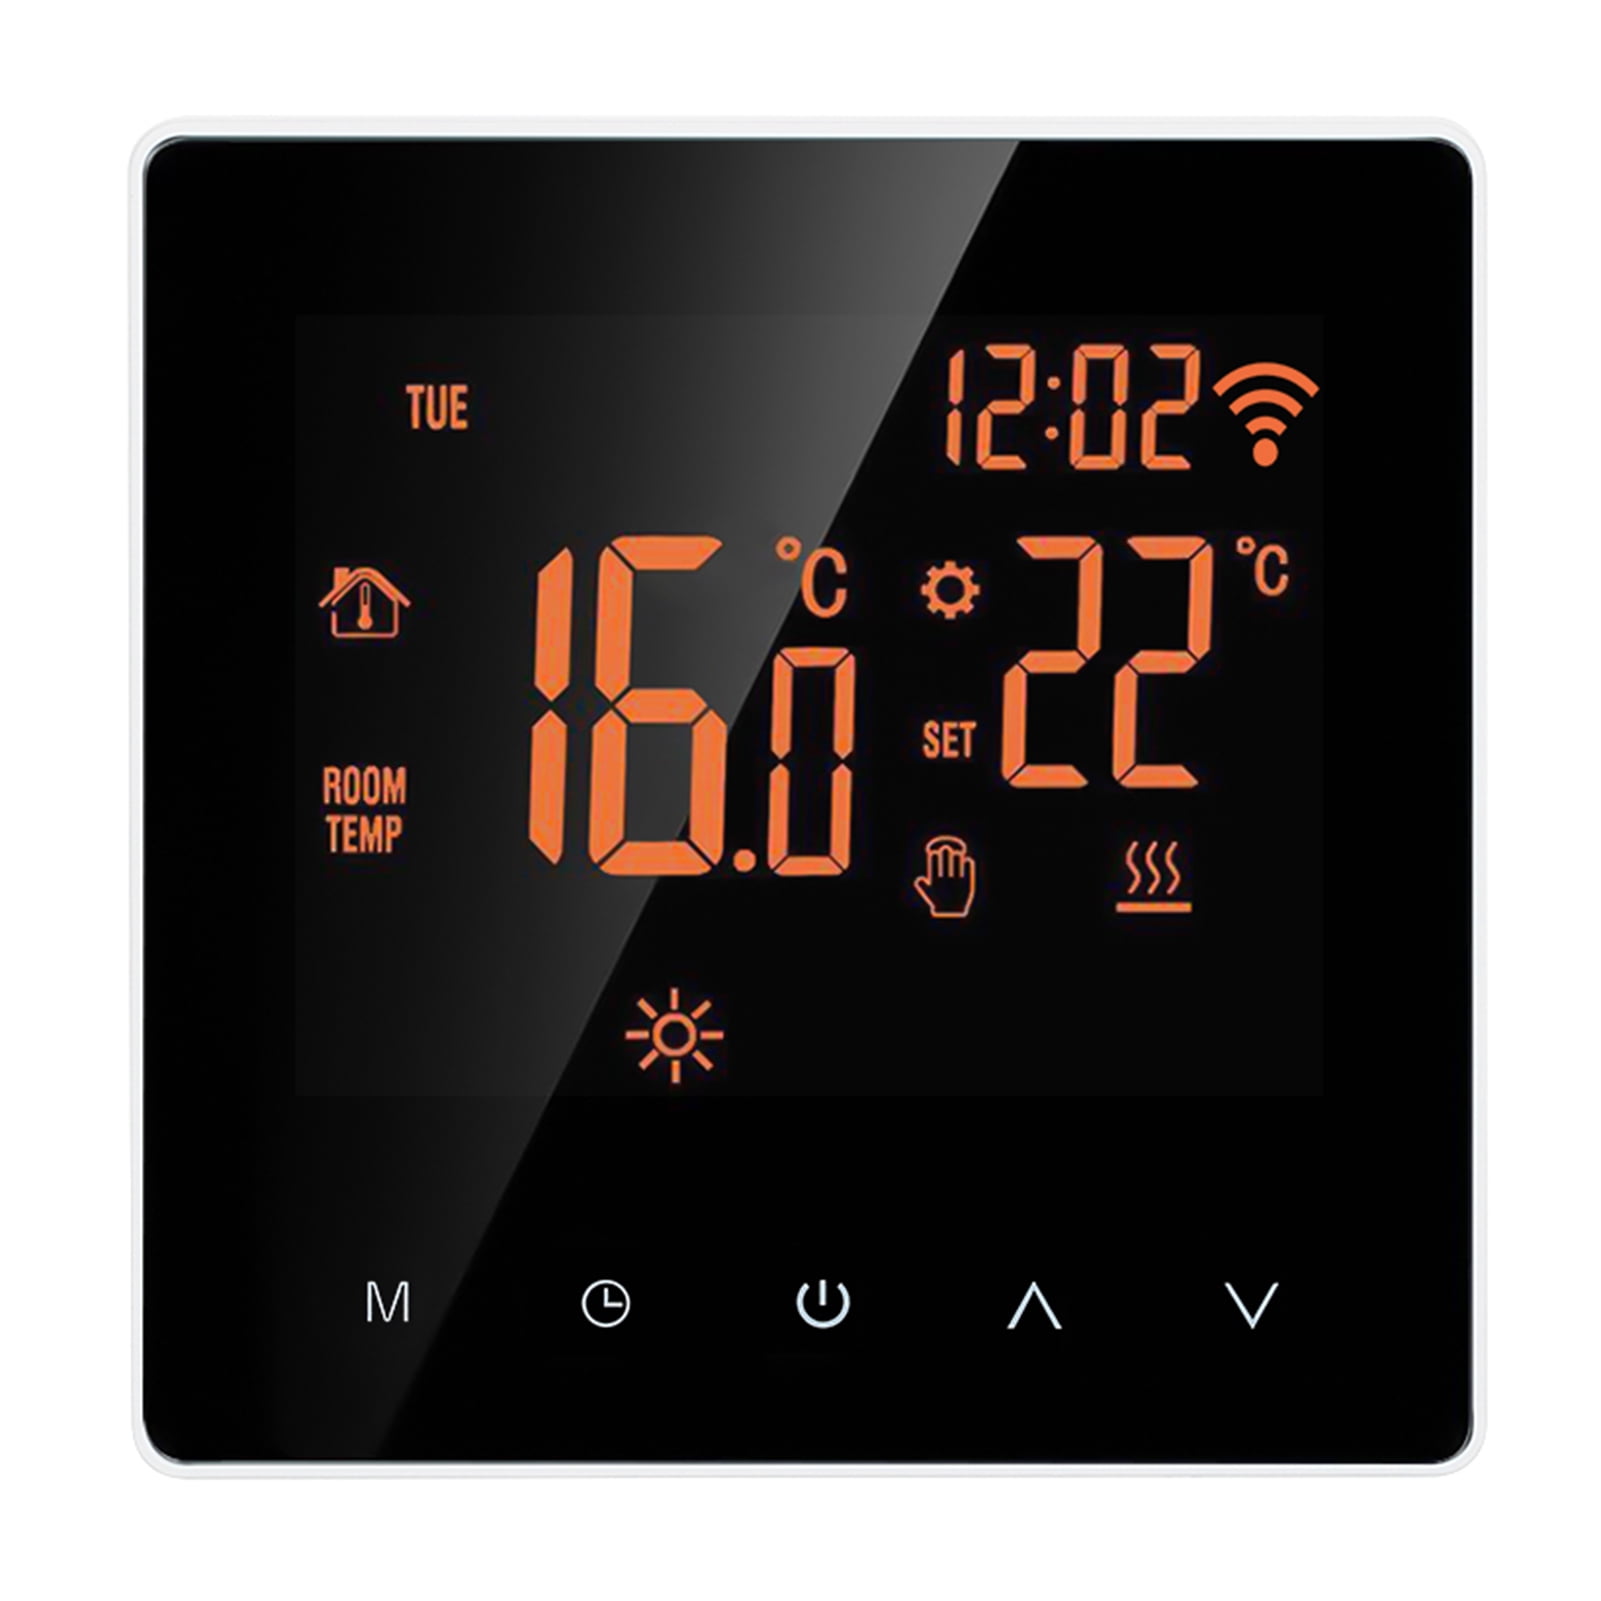 TouchScreen Programmable LCD Digital Floor Room Temp Electric Heating Thermostat